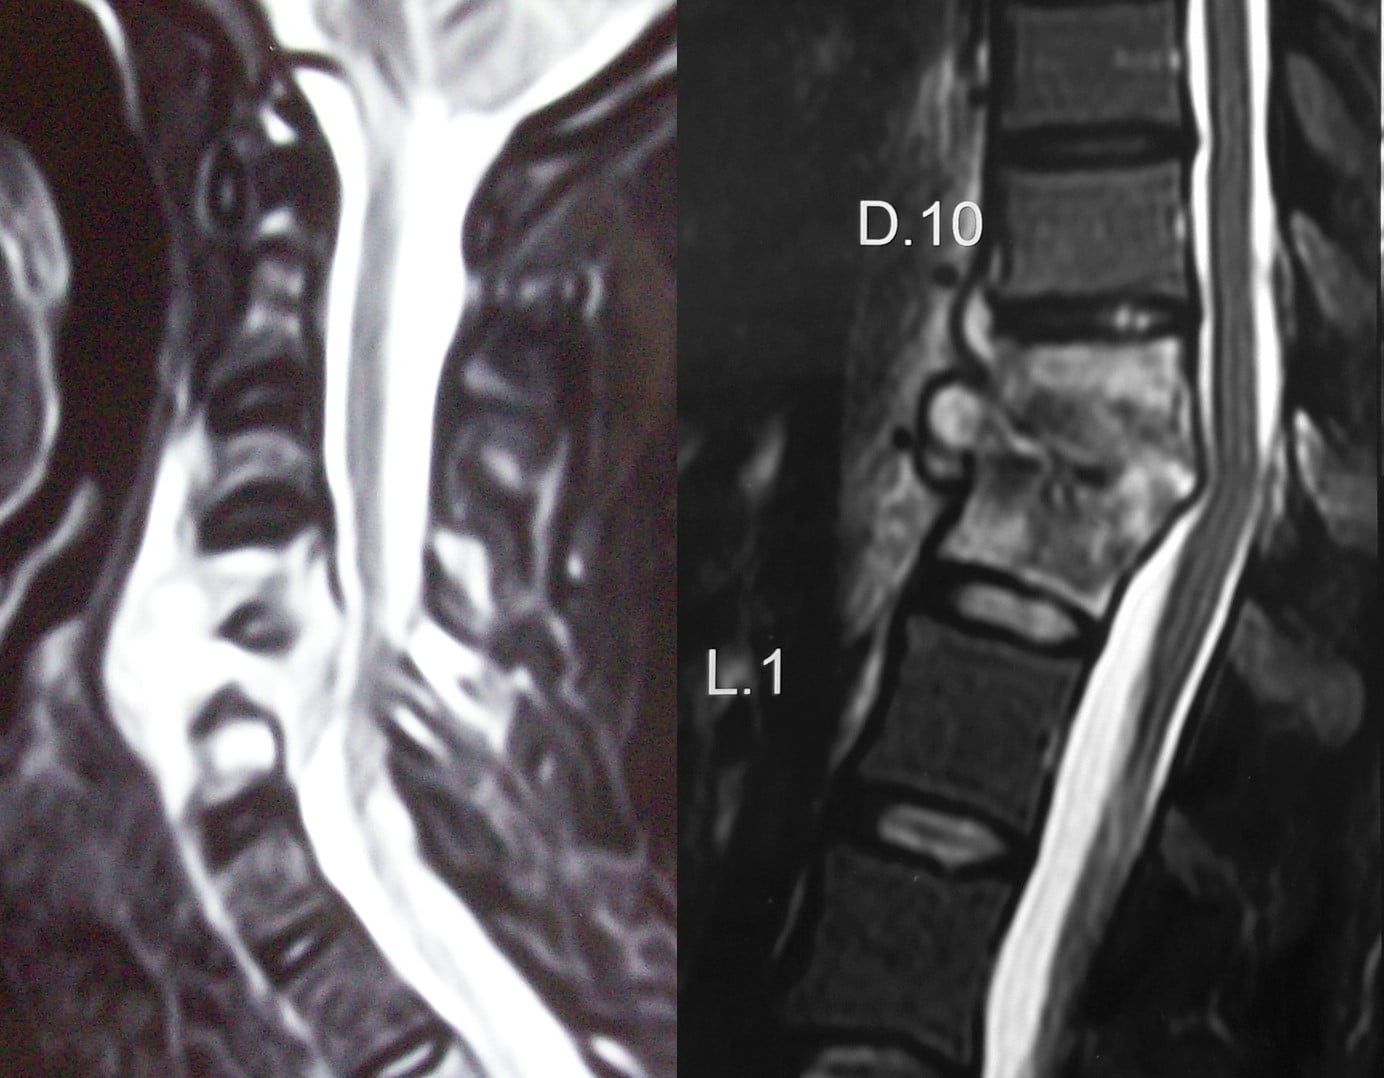 Tuberculosis Of Spine